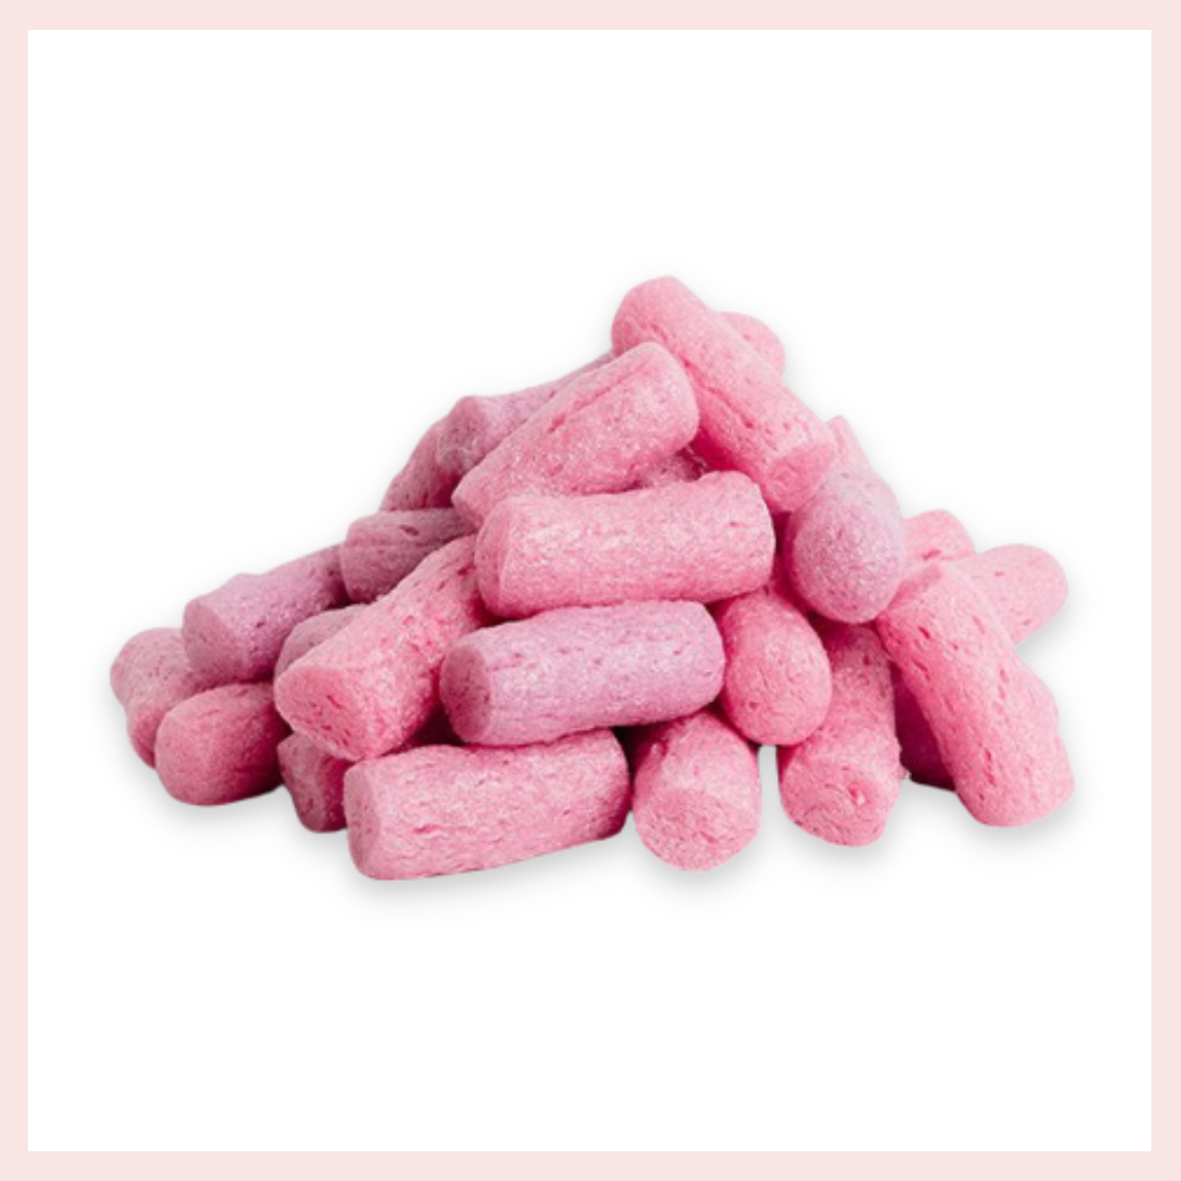 Pink packing peanuts